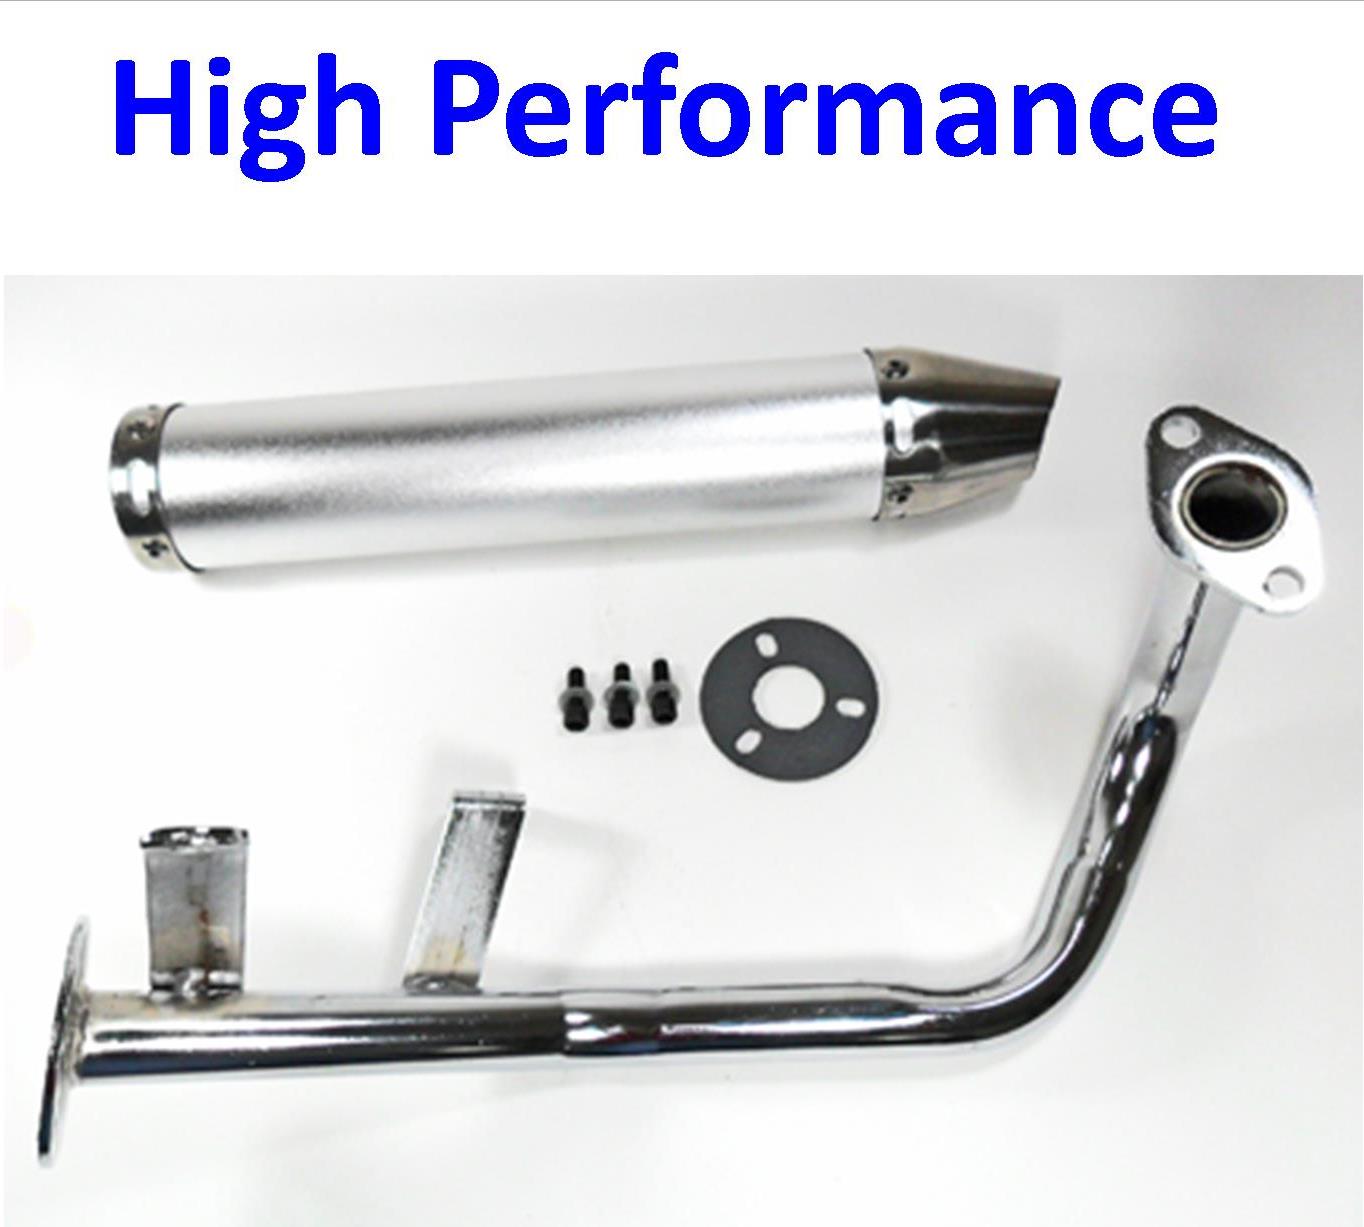 HIGH PERFORMANCE CHROME Exhaust Pipe Fits Most GY6-50 QMB139 49cc Chinese Scooter Motors Canister L=280mm D=60mm - Click Image to Close